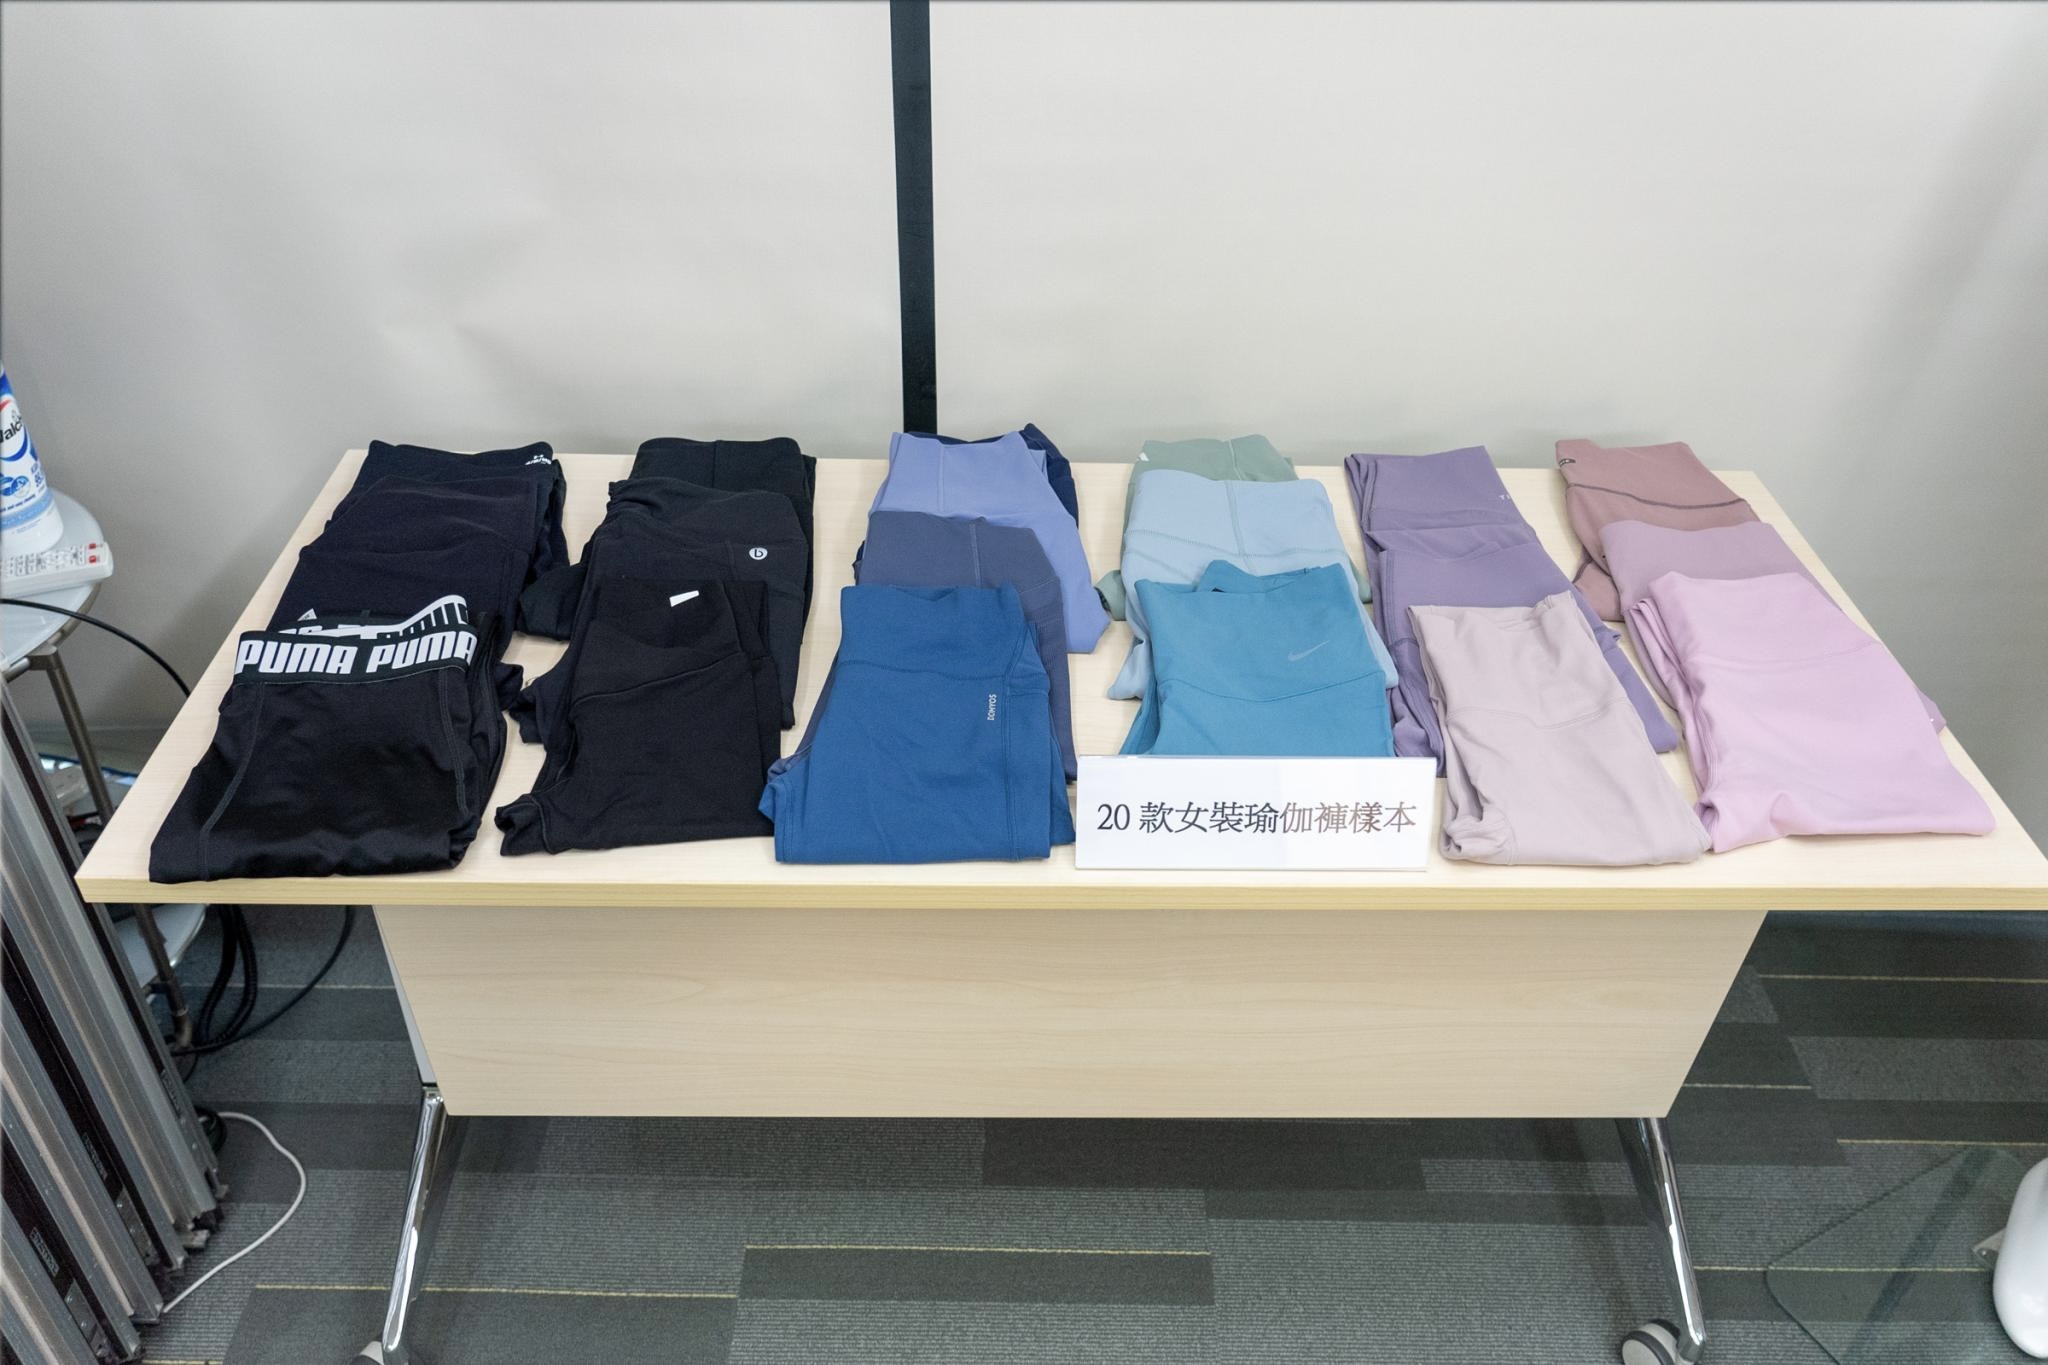 Twenty models of yoga pants displayed on a table. The pants vary in terms of colour, though most are in shades of blue or black.